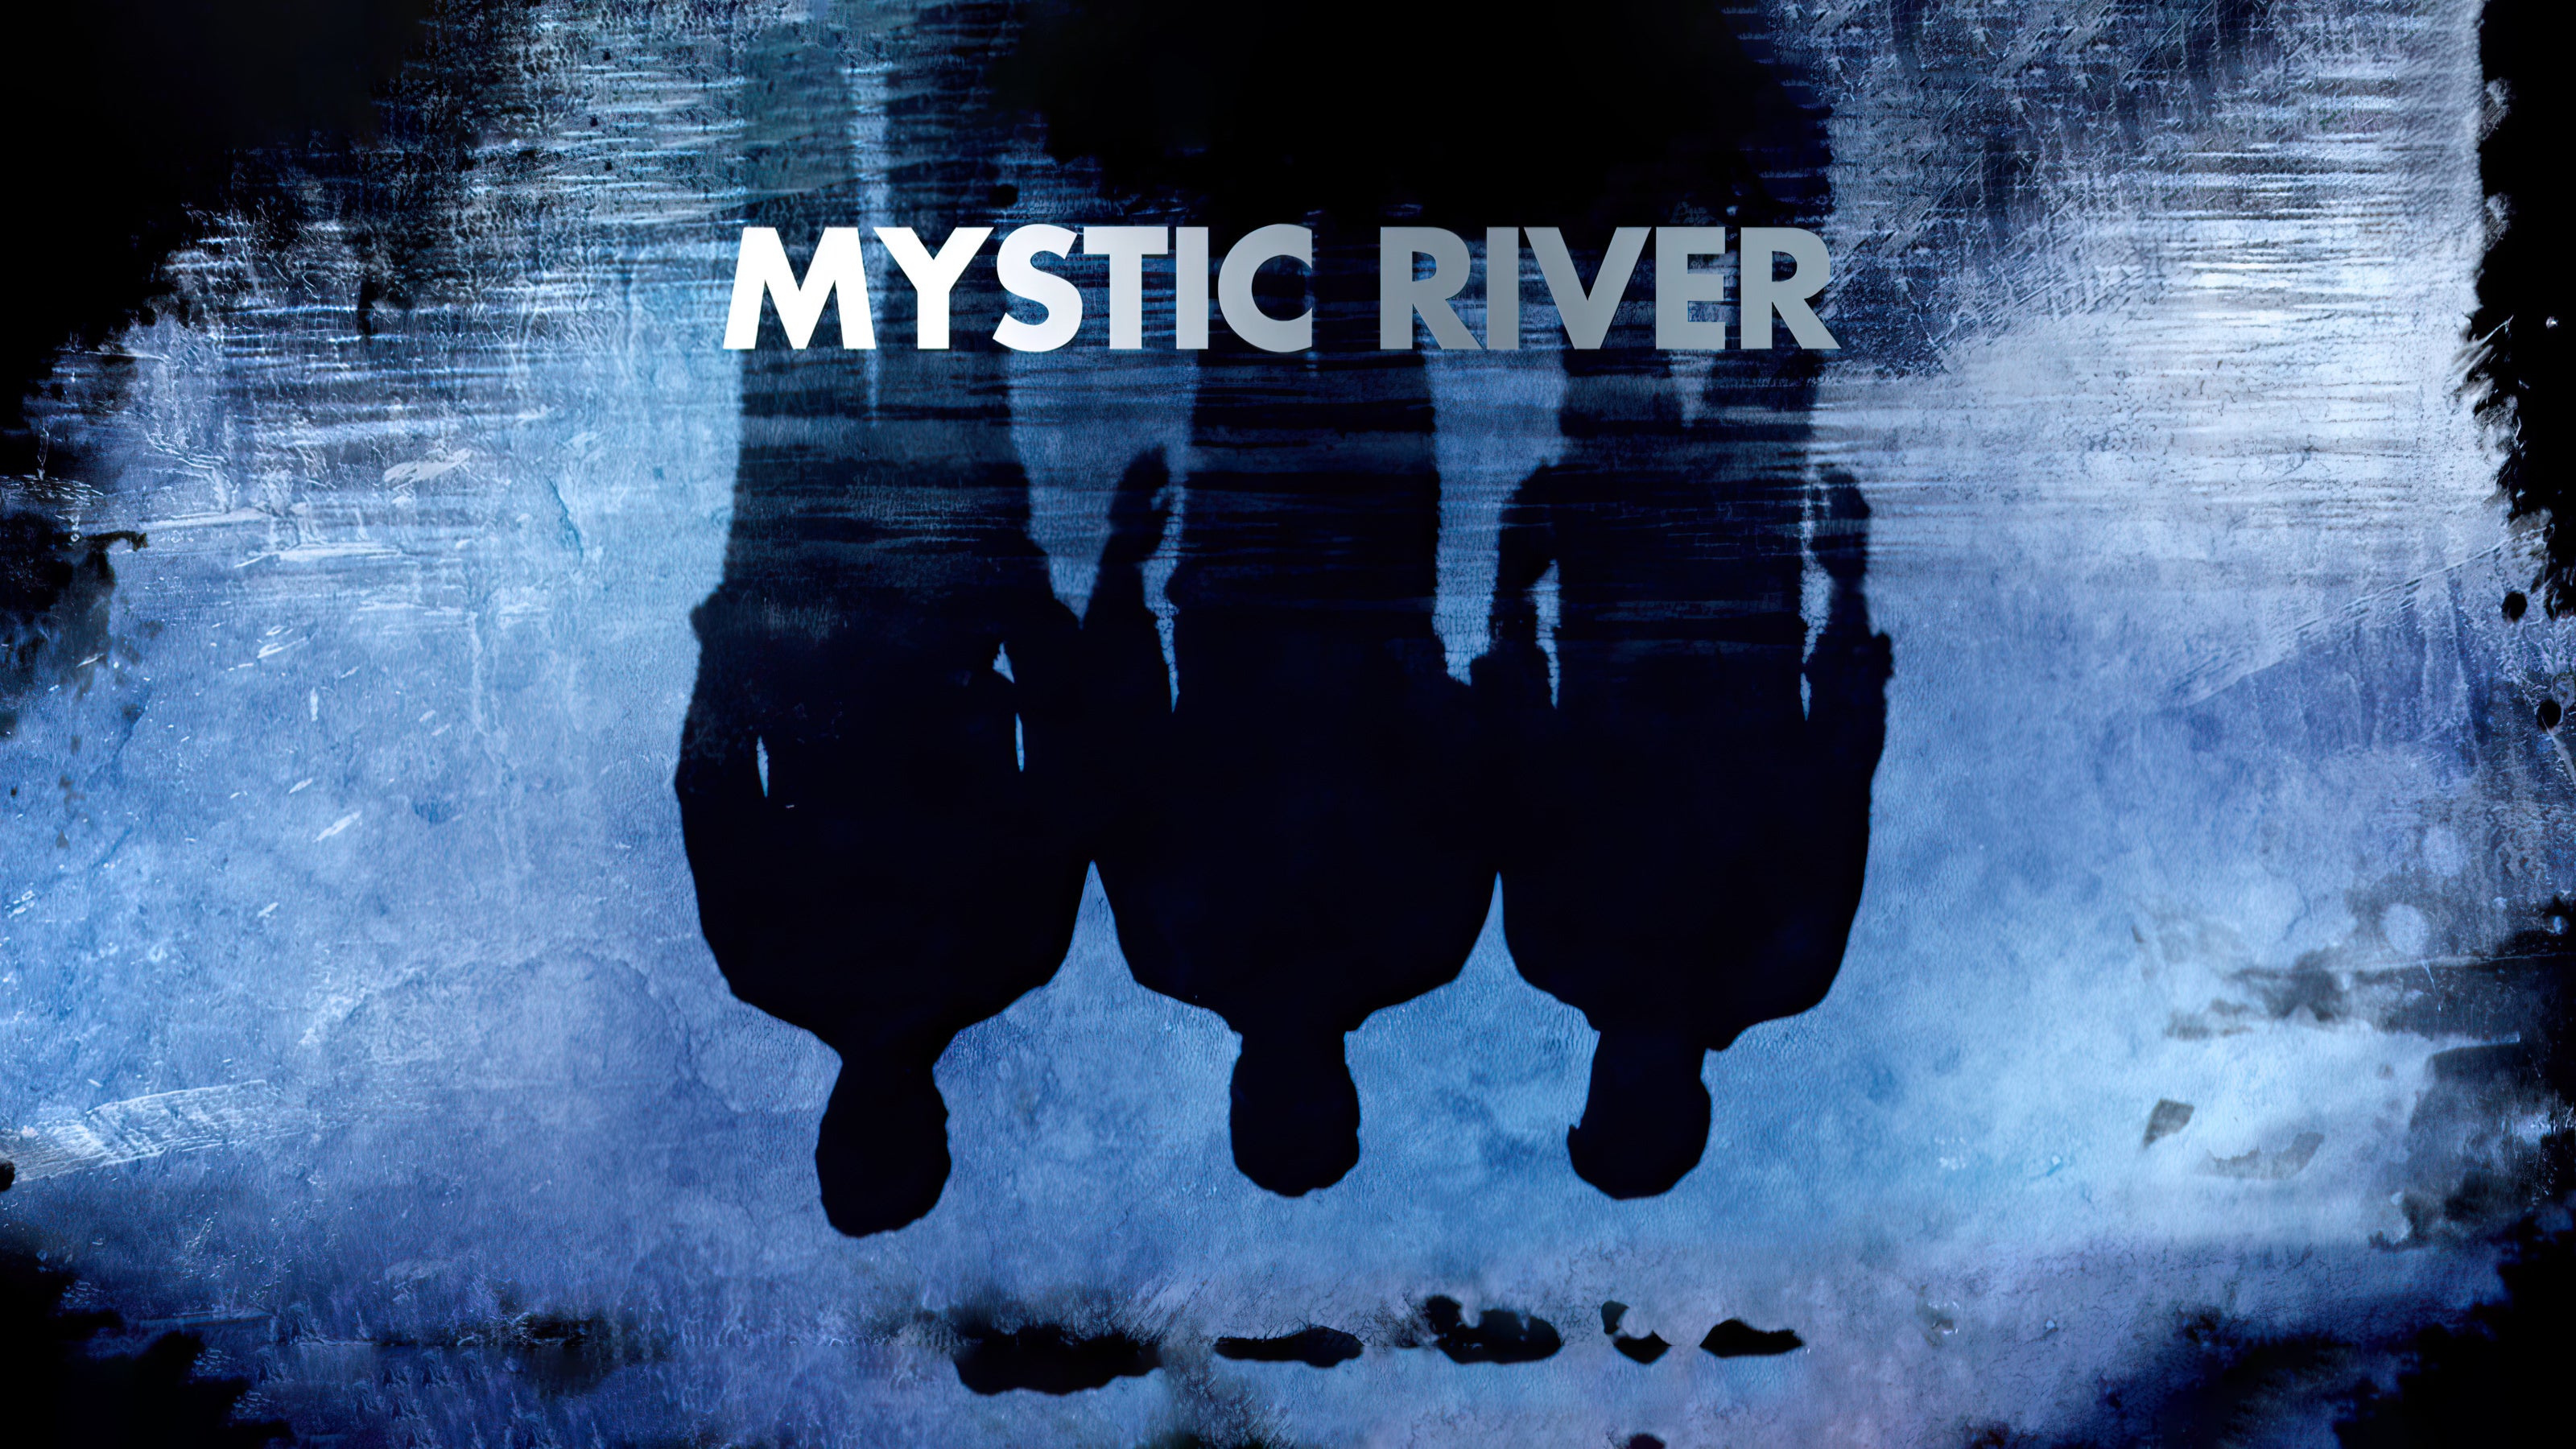 Mystic River Script Screenplay - Image of Movie Poster